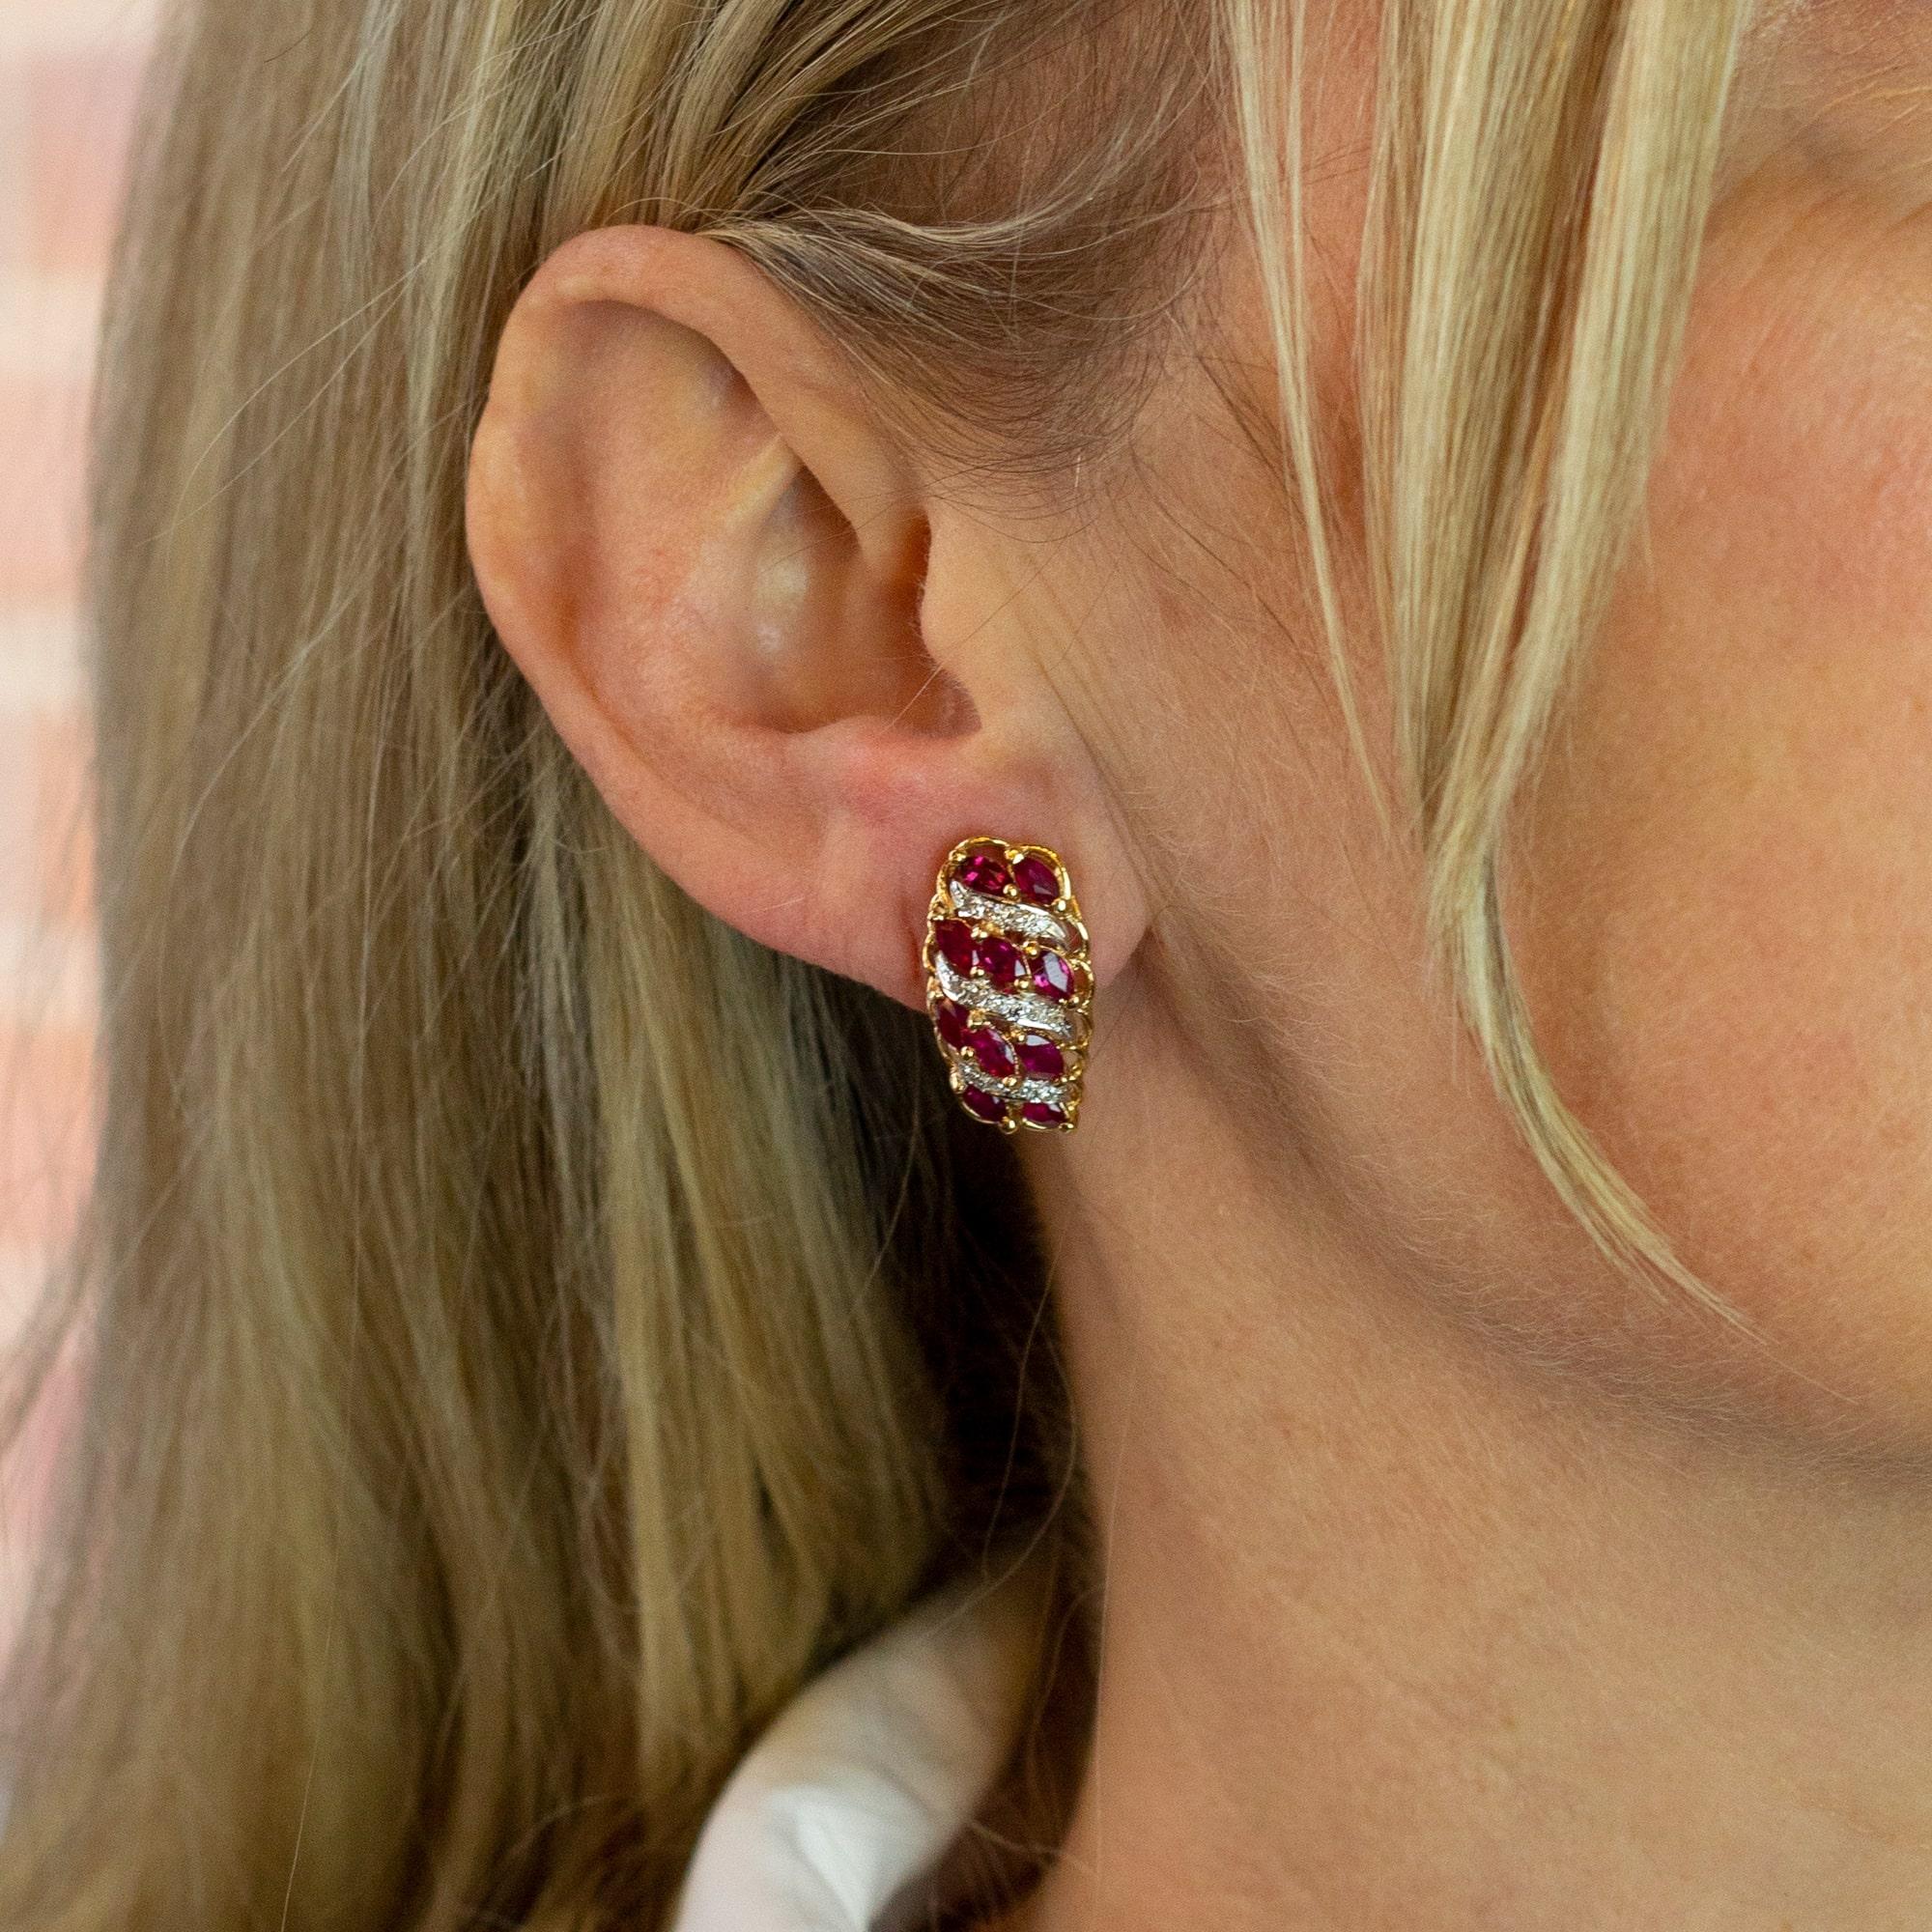 A wonderful pair of mid century 14 karat gold, ruby and diamond screw back earrings. The two tone earrings comprise of marquise cut rubies which are accented with single cut diamonds which flow down the ear diagonally. The rubies and diamonds are